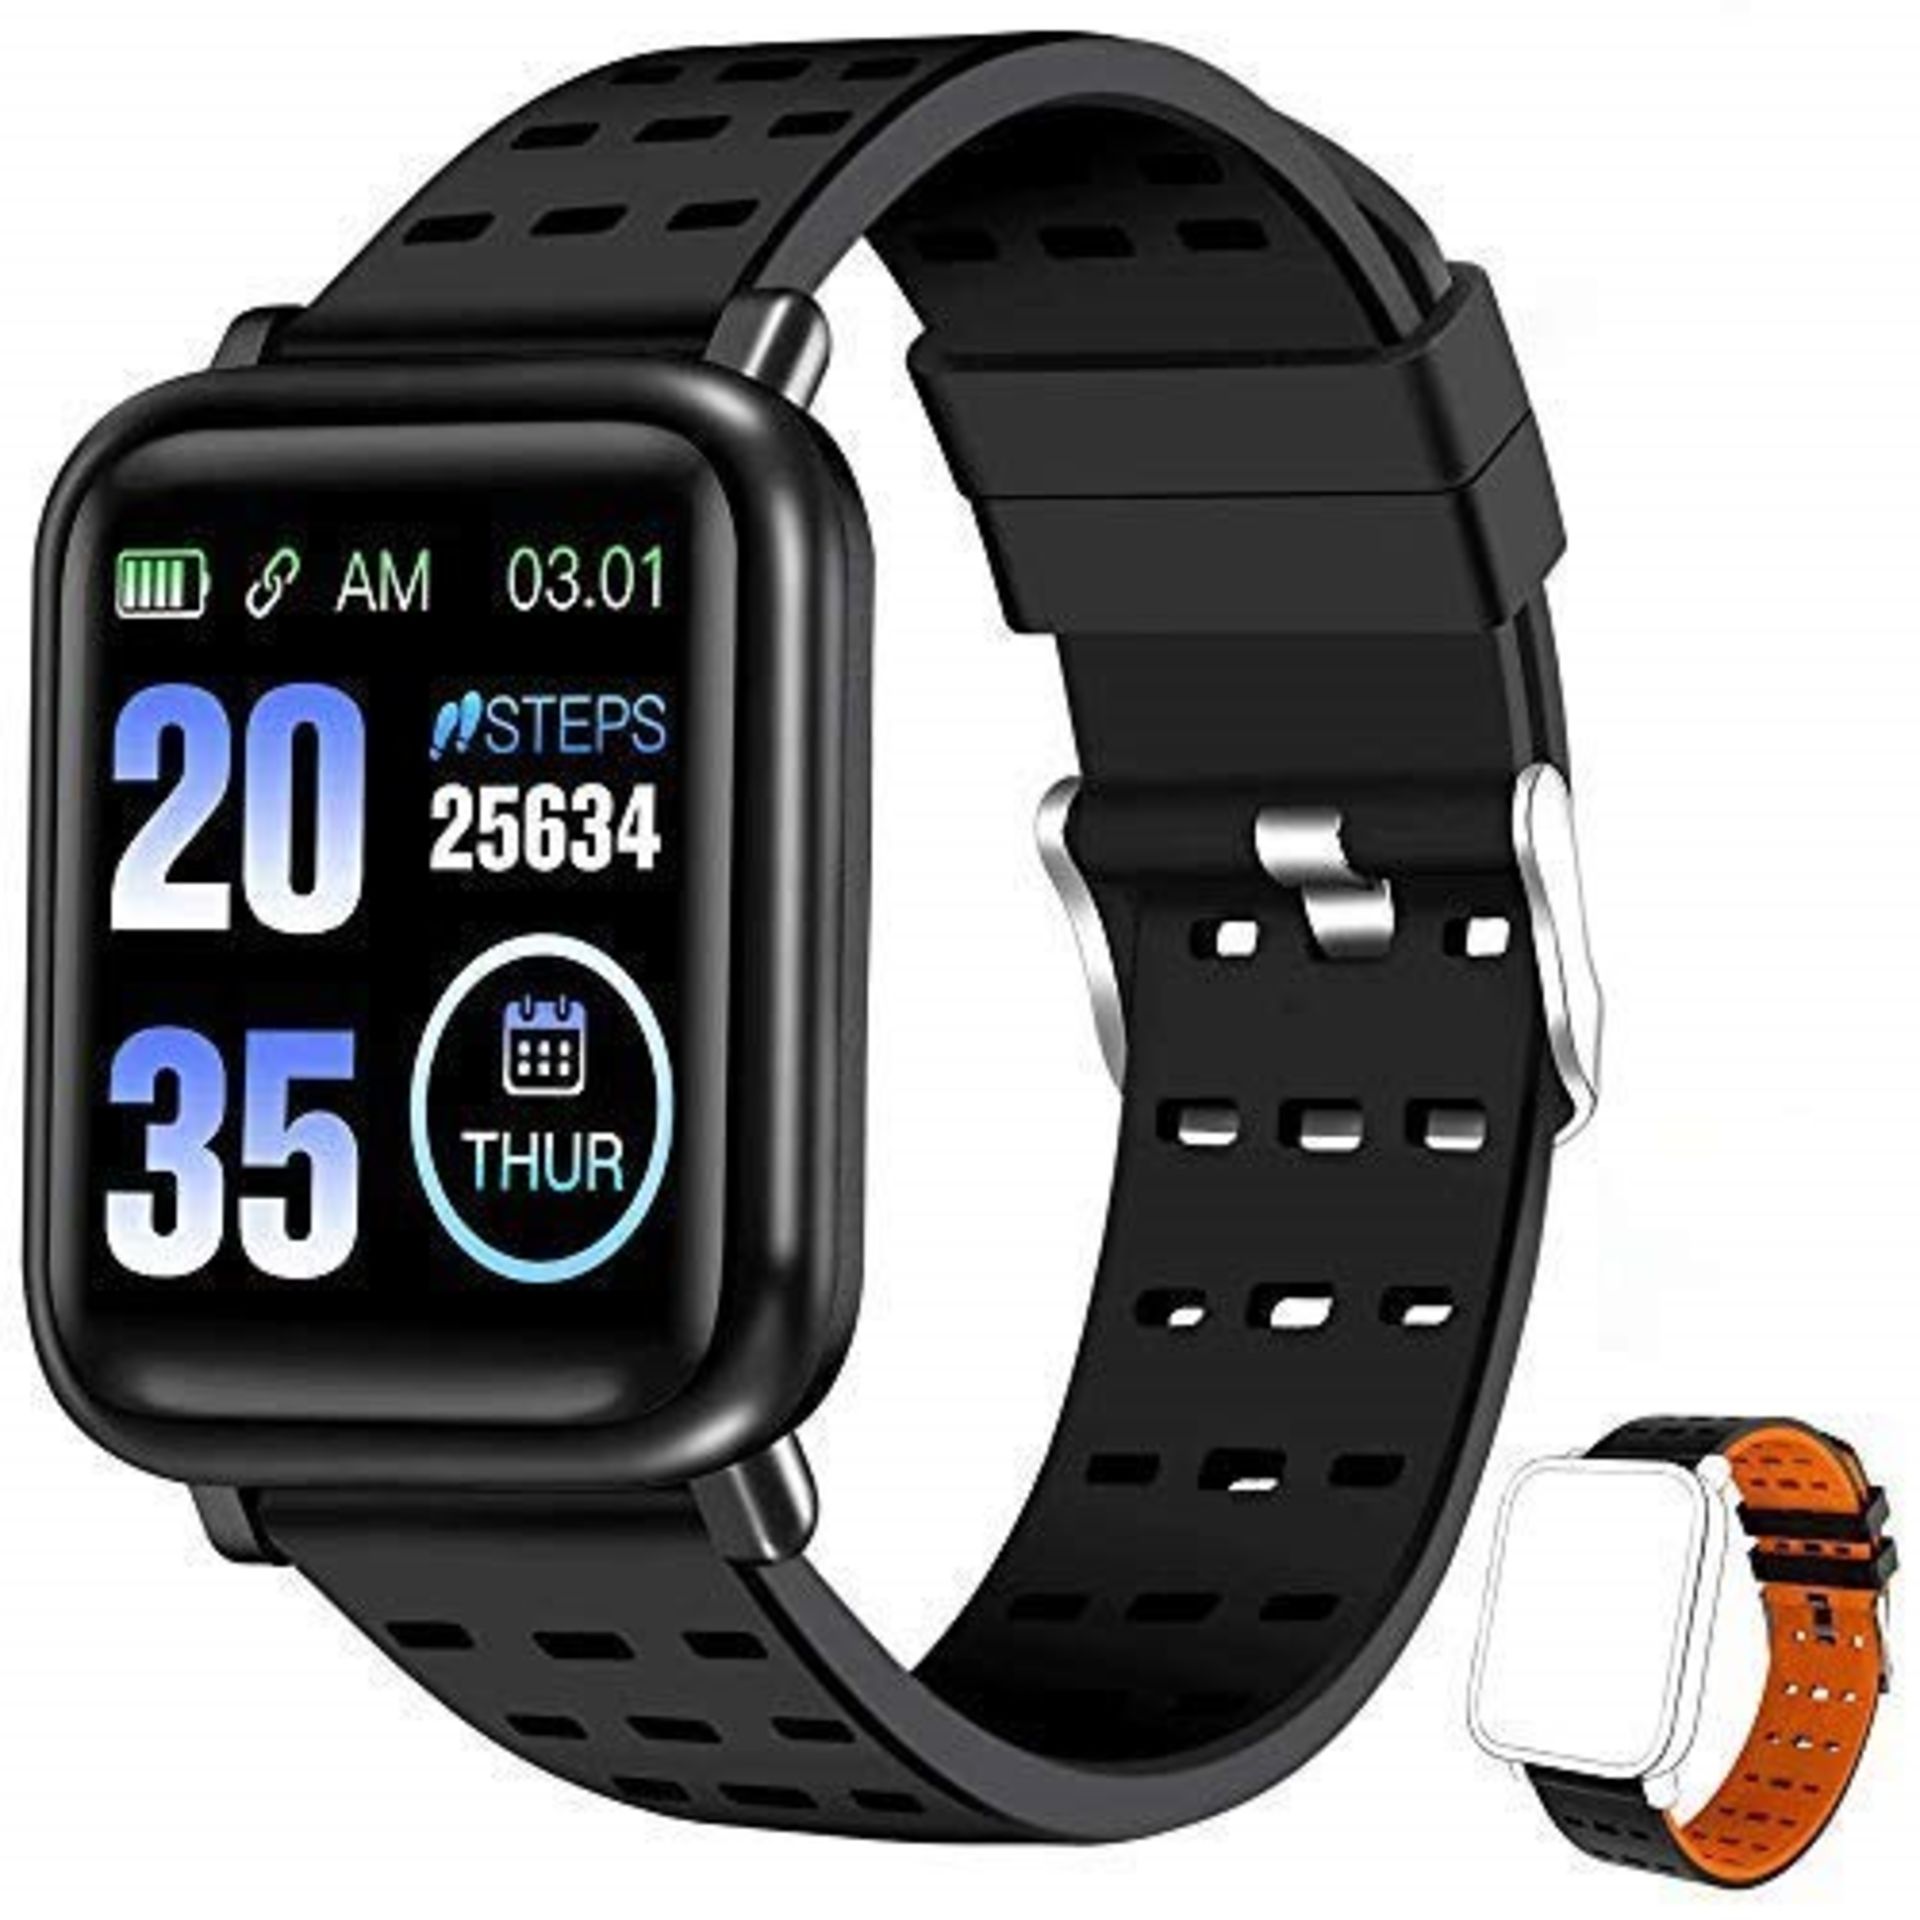 ANCwear Bluetooth Smart Watches Fitness Trackers